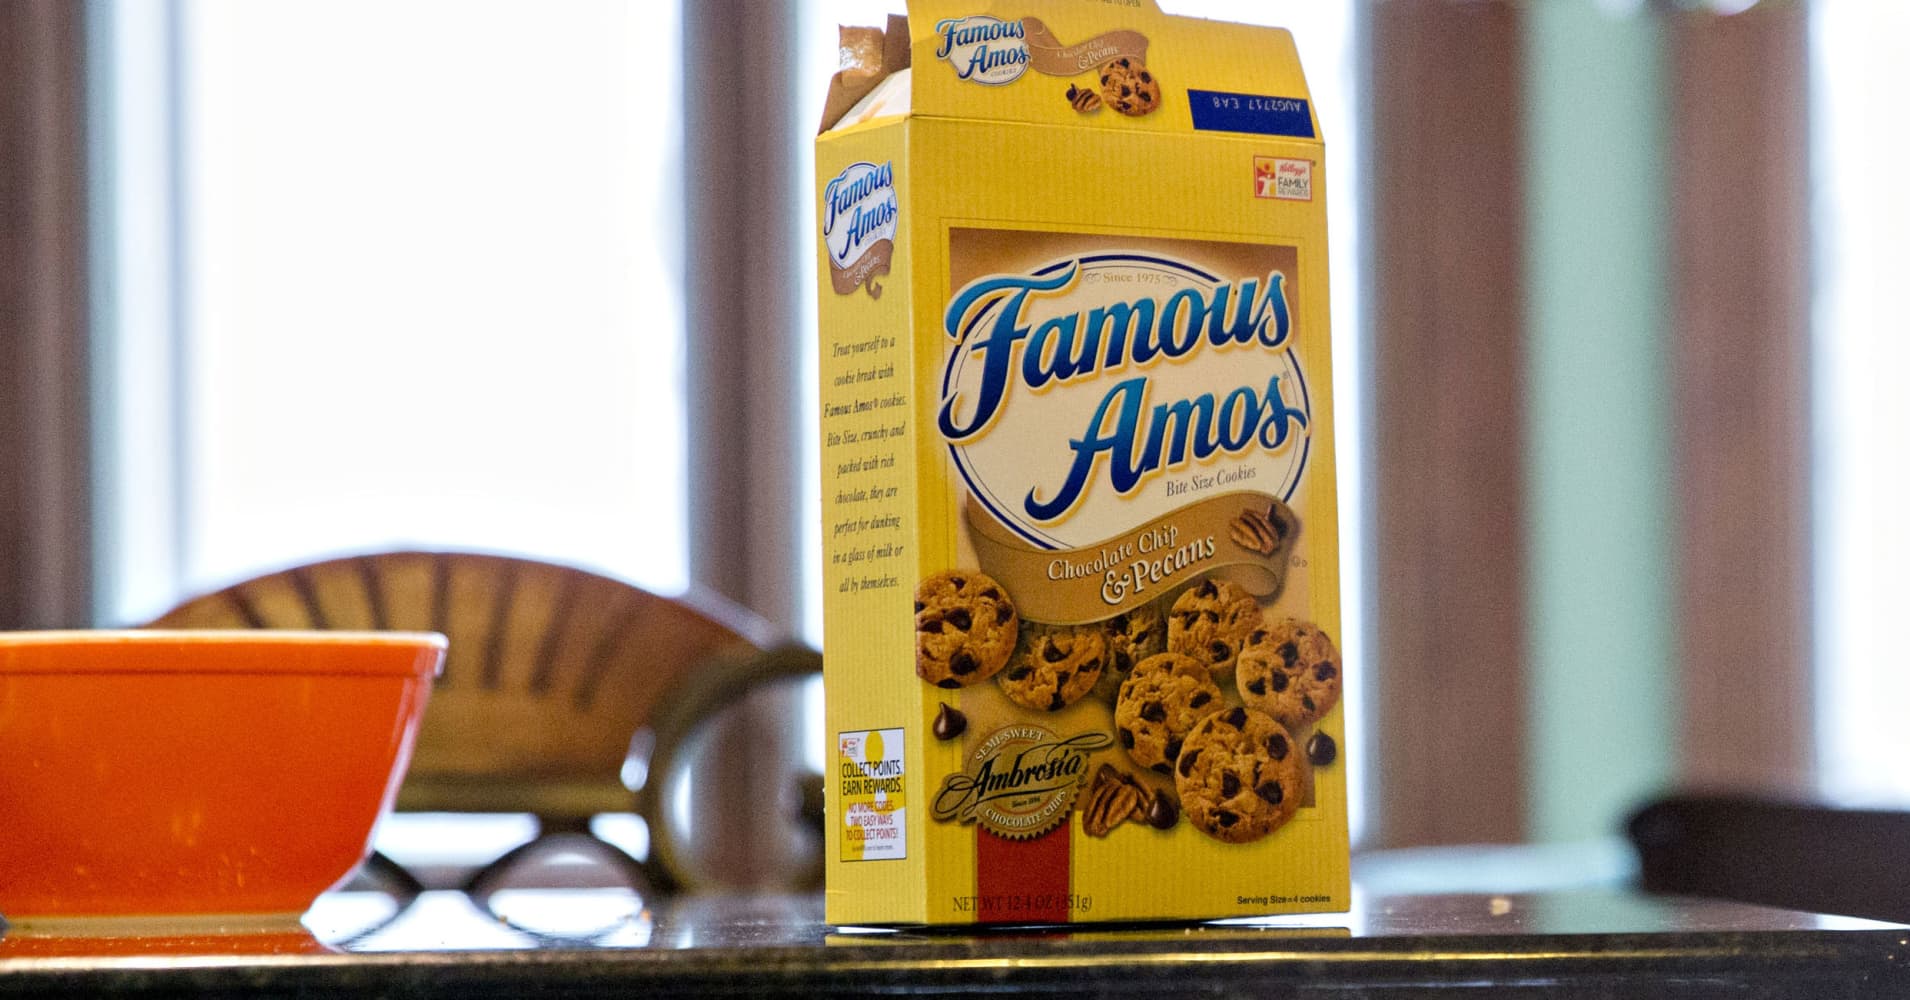 Kellogg nears deal to sell Keebler and Famous Amos business to Nutella owner Ferrero